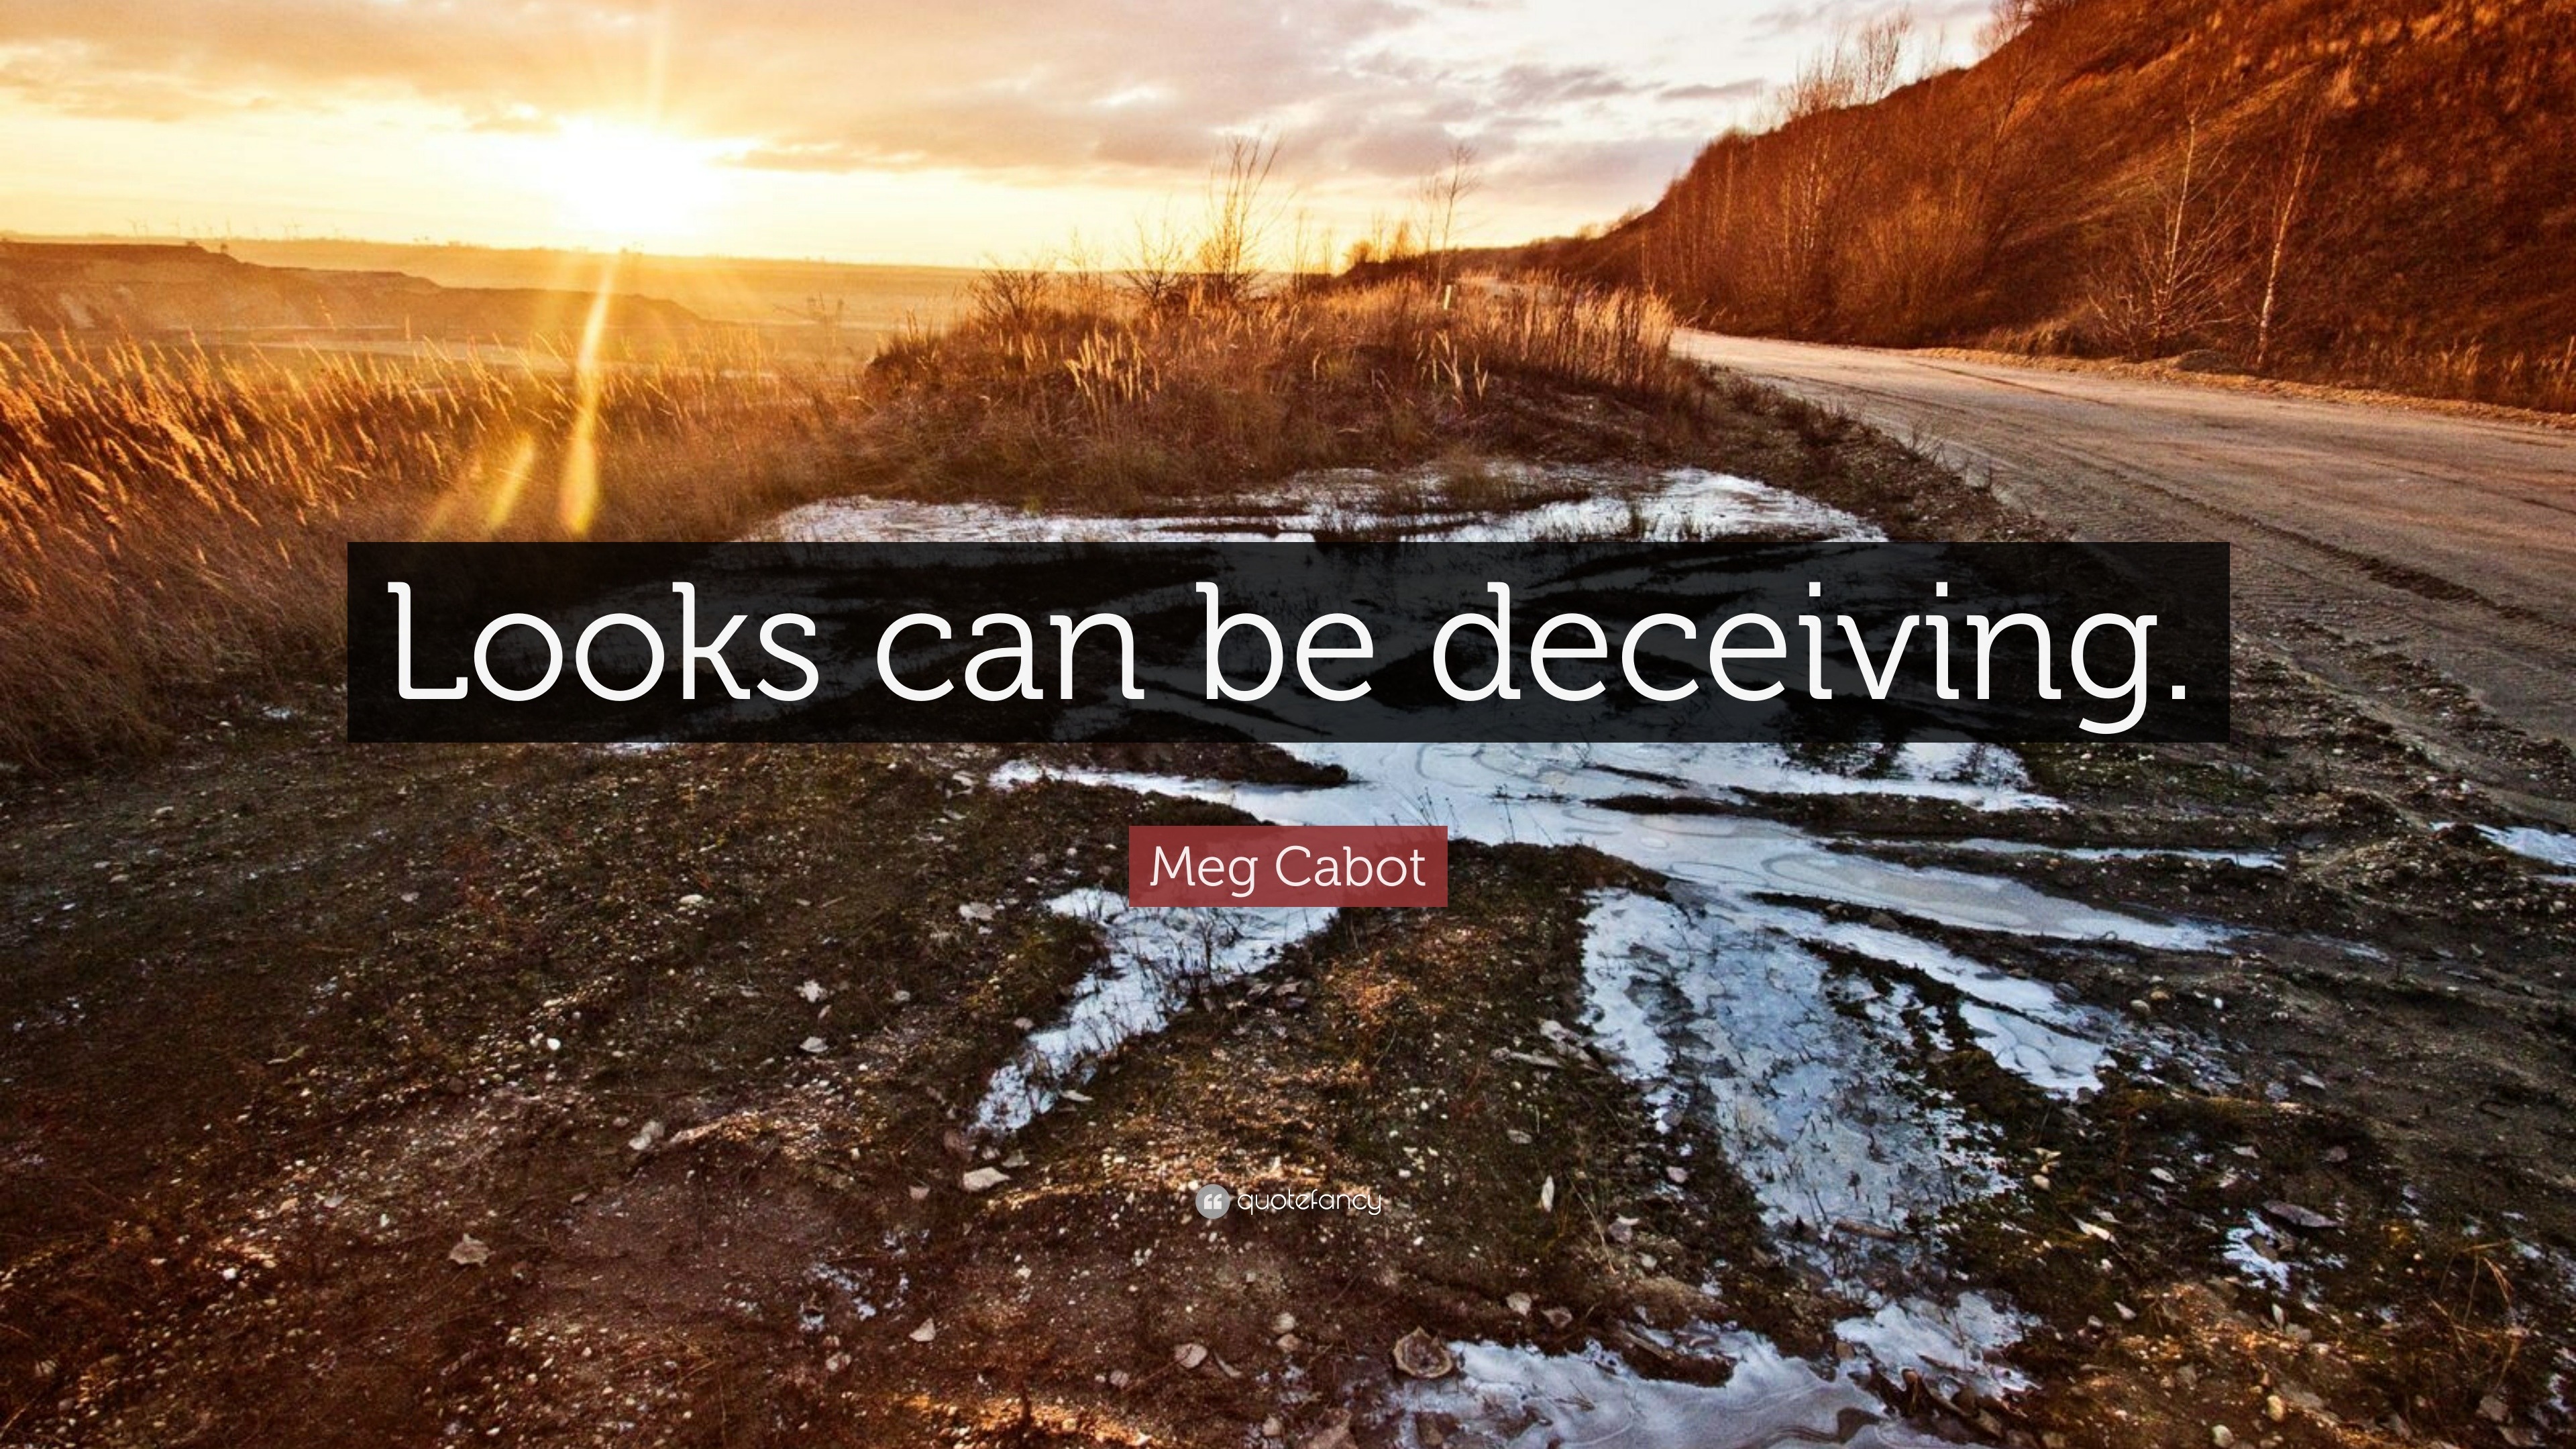 Meg Cabot Quote “Looks can be deceiving.”